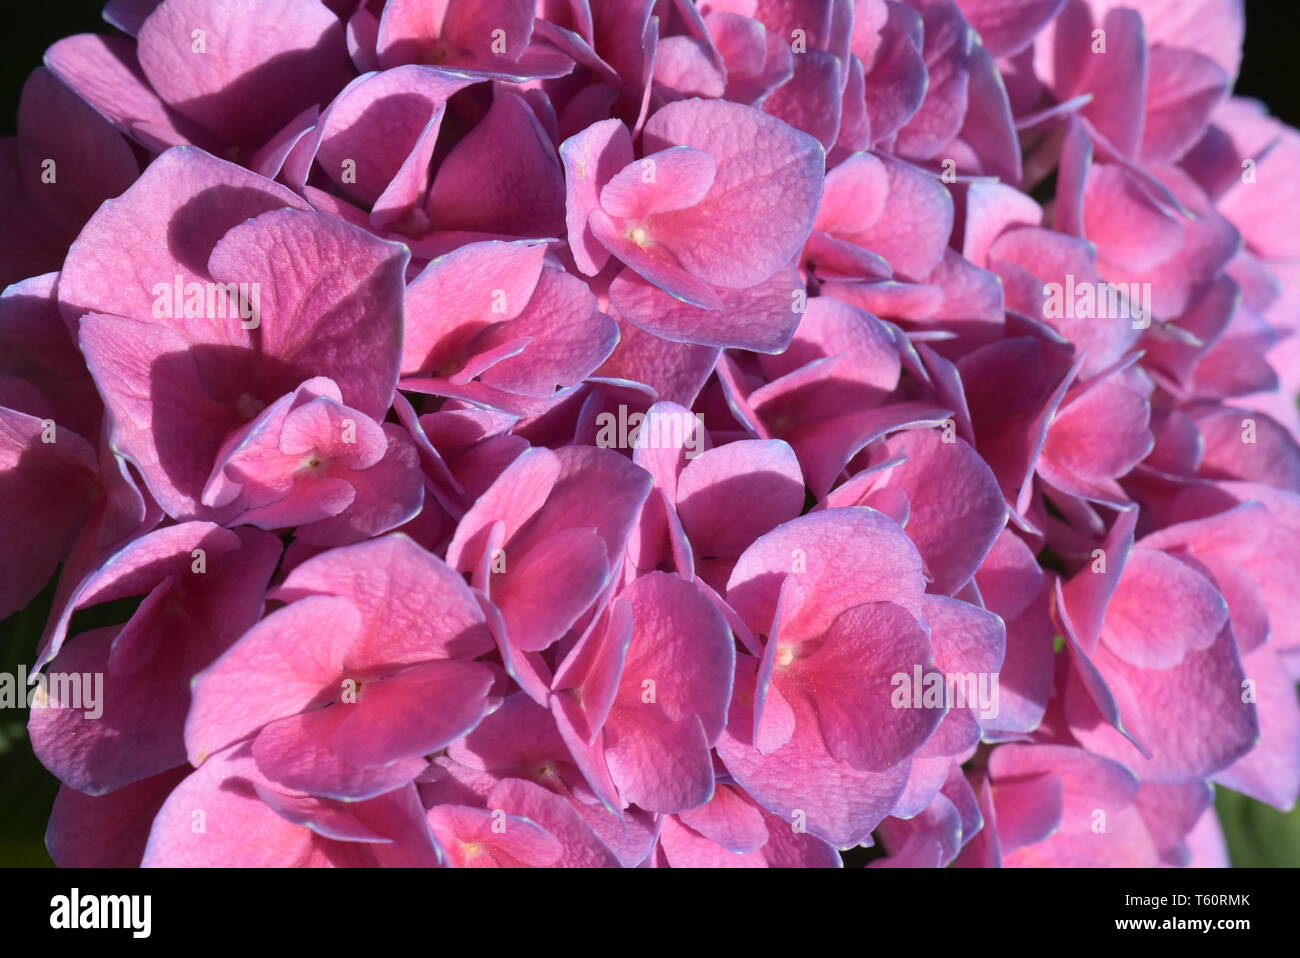 Closeup on pink mophead flower Hydrangea macrophylla with blue edges Stock Photo